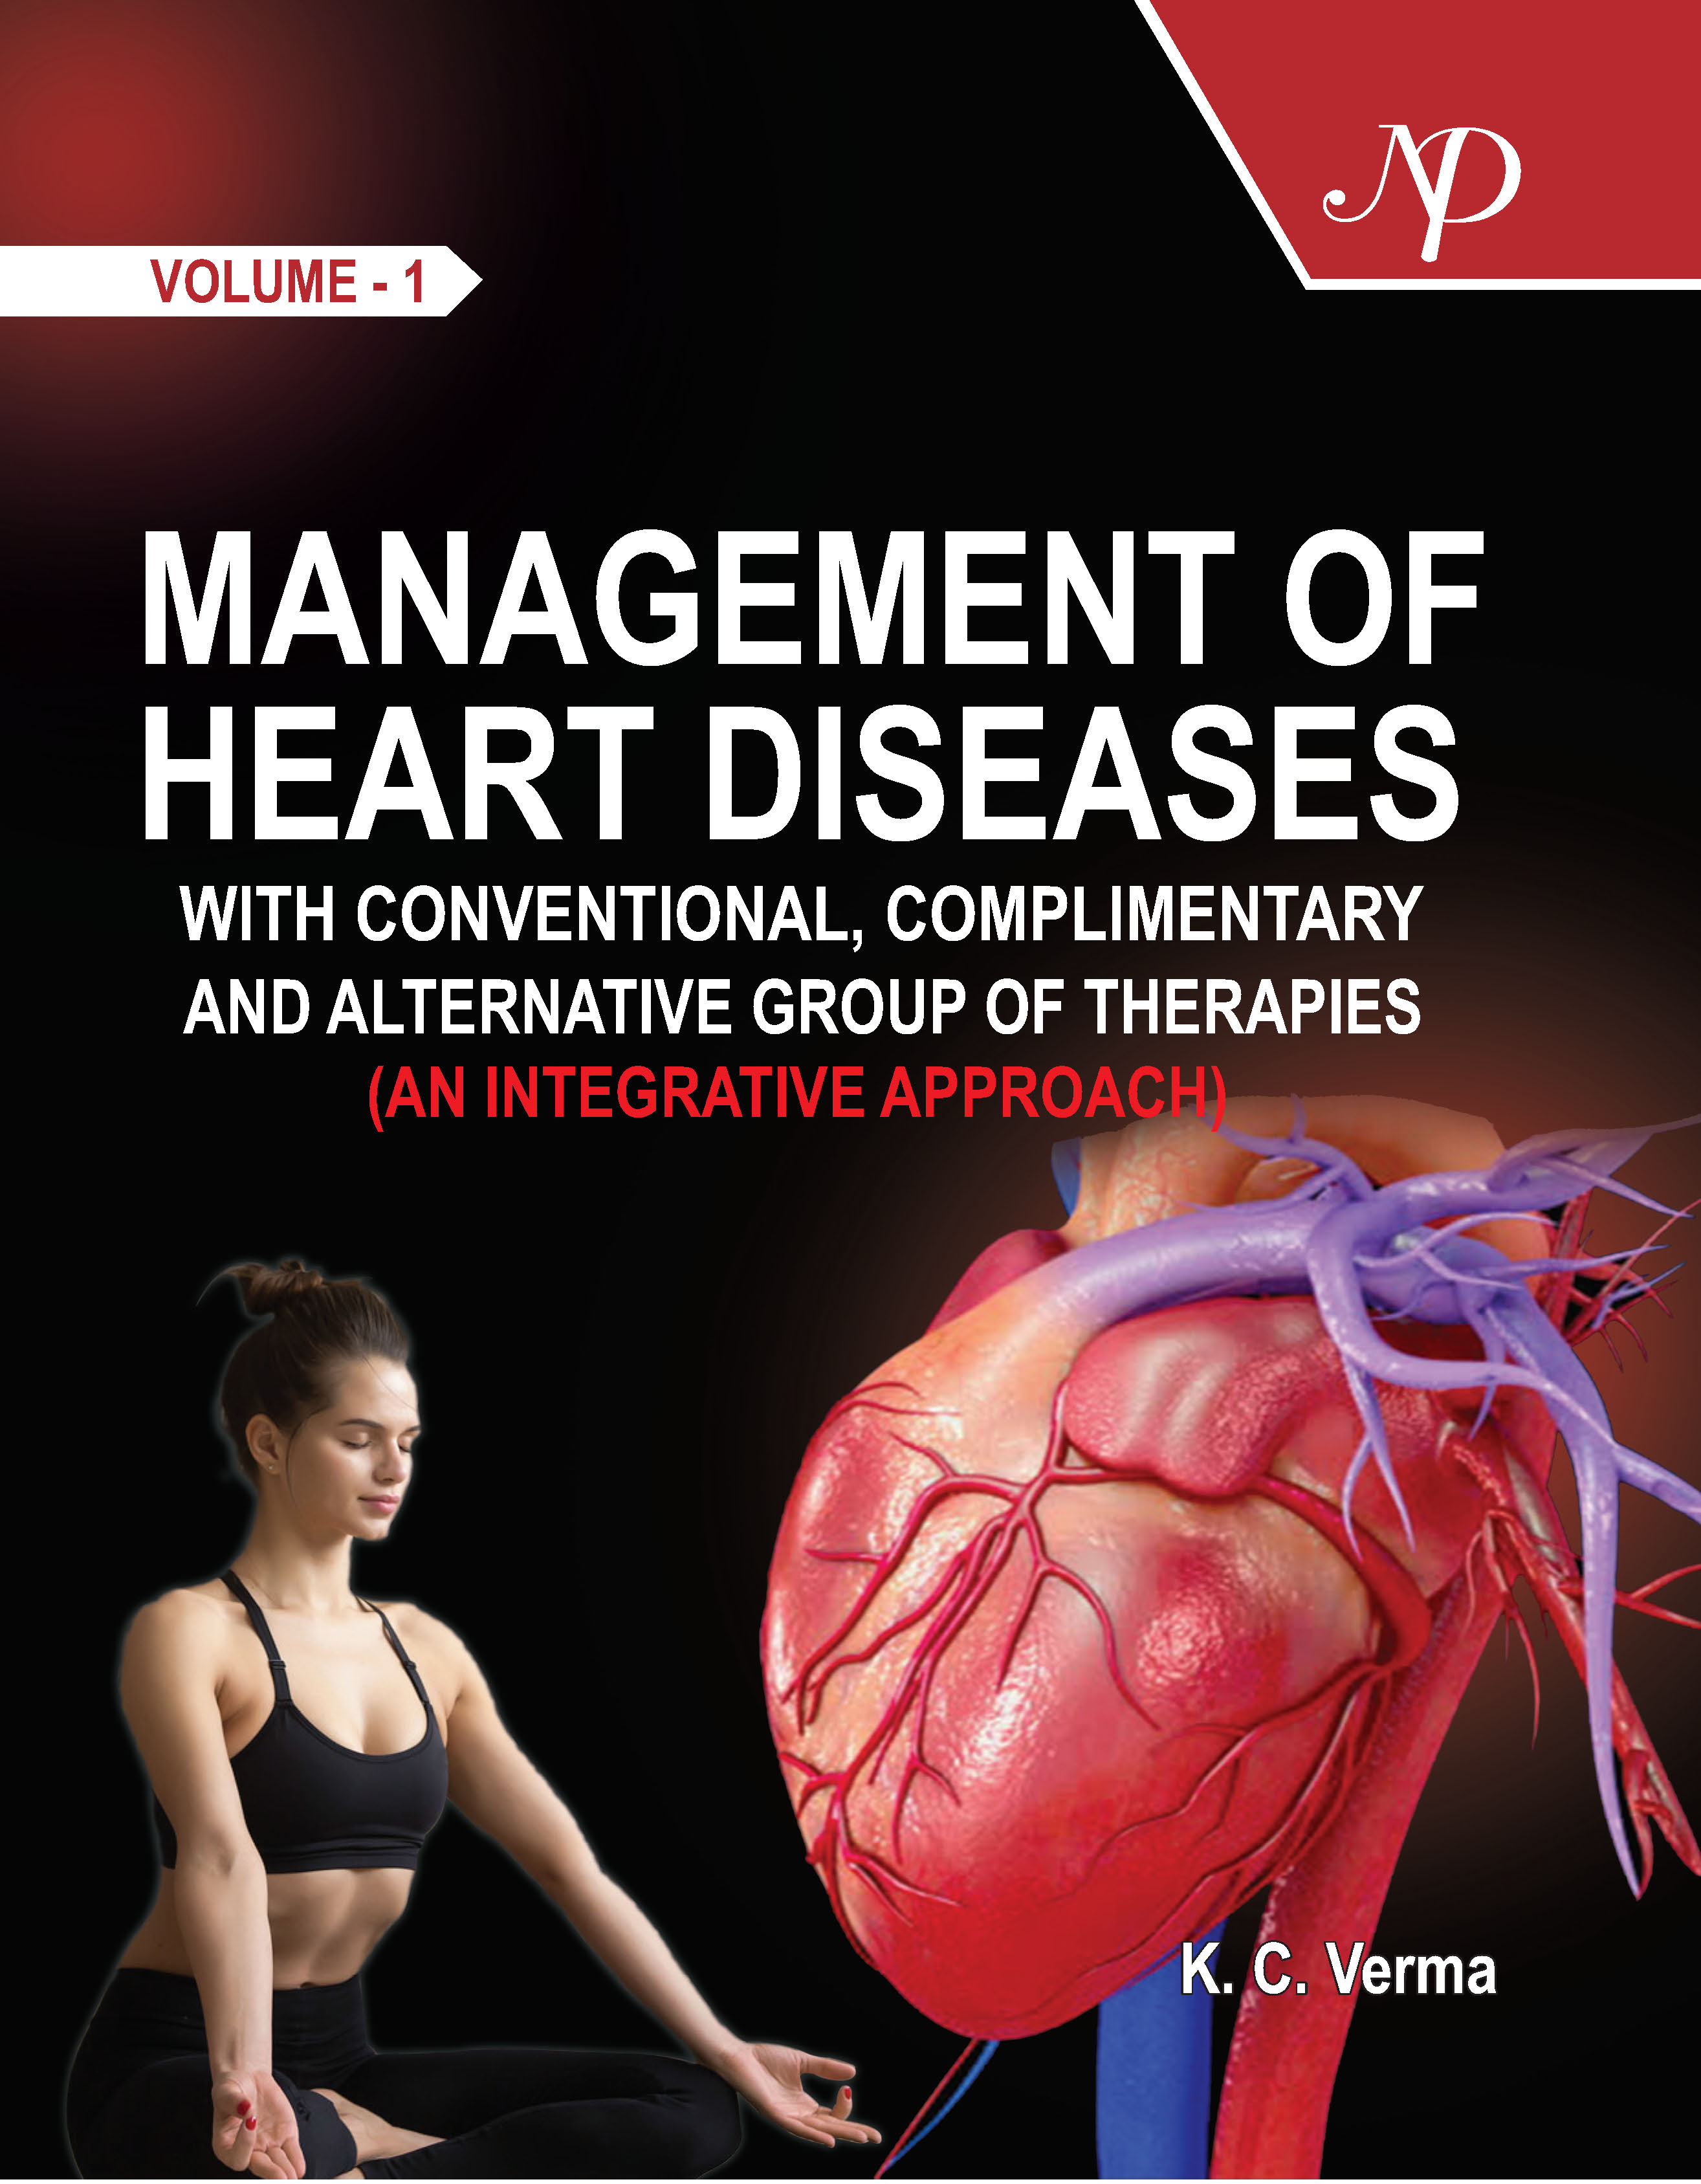 Management of Heart Diseases with Conventional, Complimentary and Alternative Group of Therapies (An Integrative Approach) Volume - I